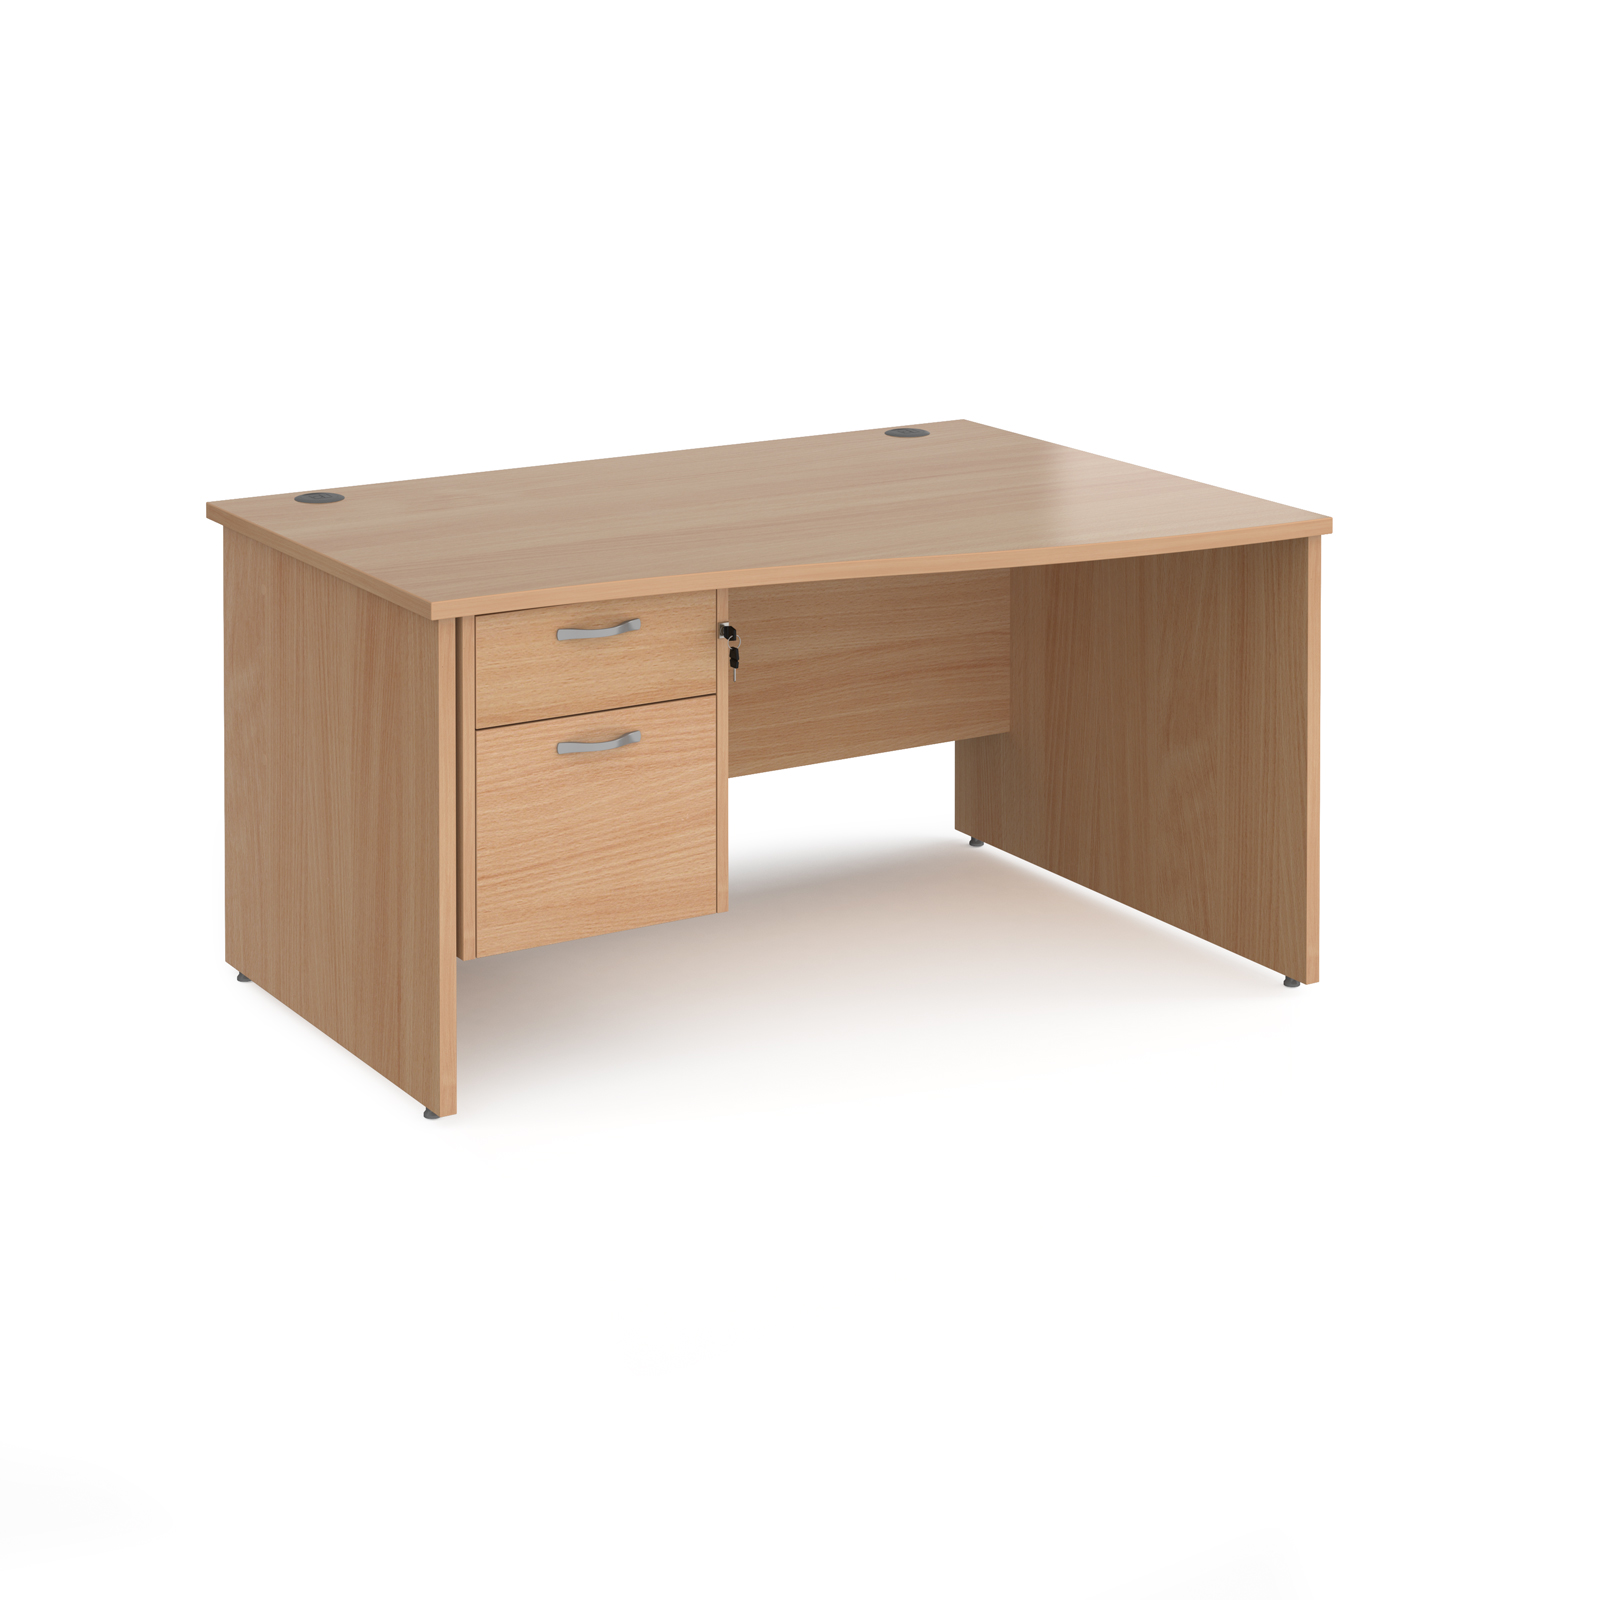 Maestro 25 right hand wave desk 1400mm wide with 2 drawer pedestal - beech top with panel end leg